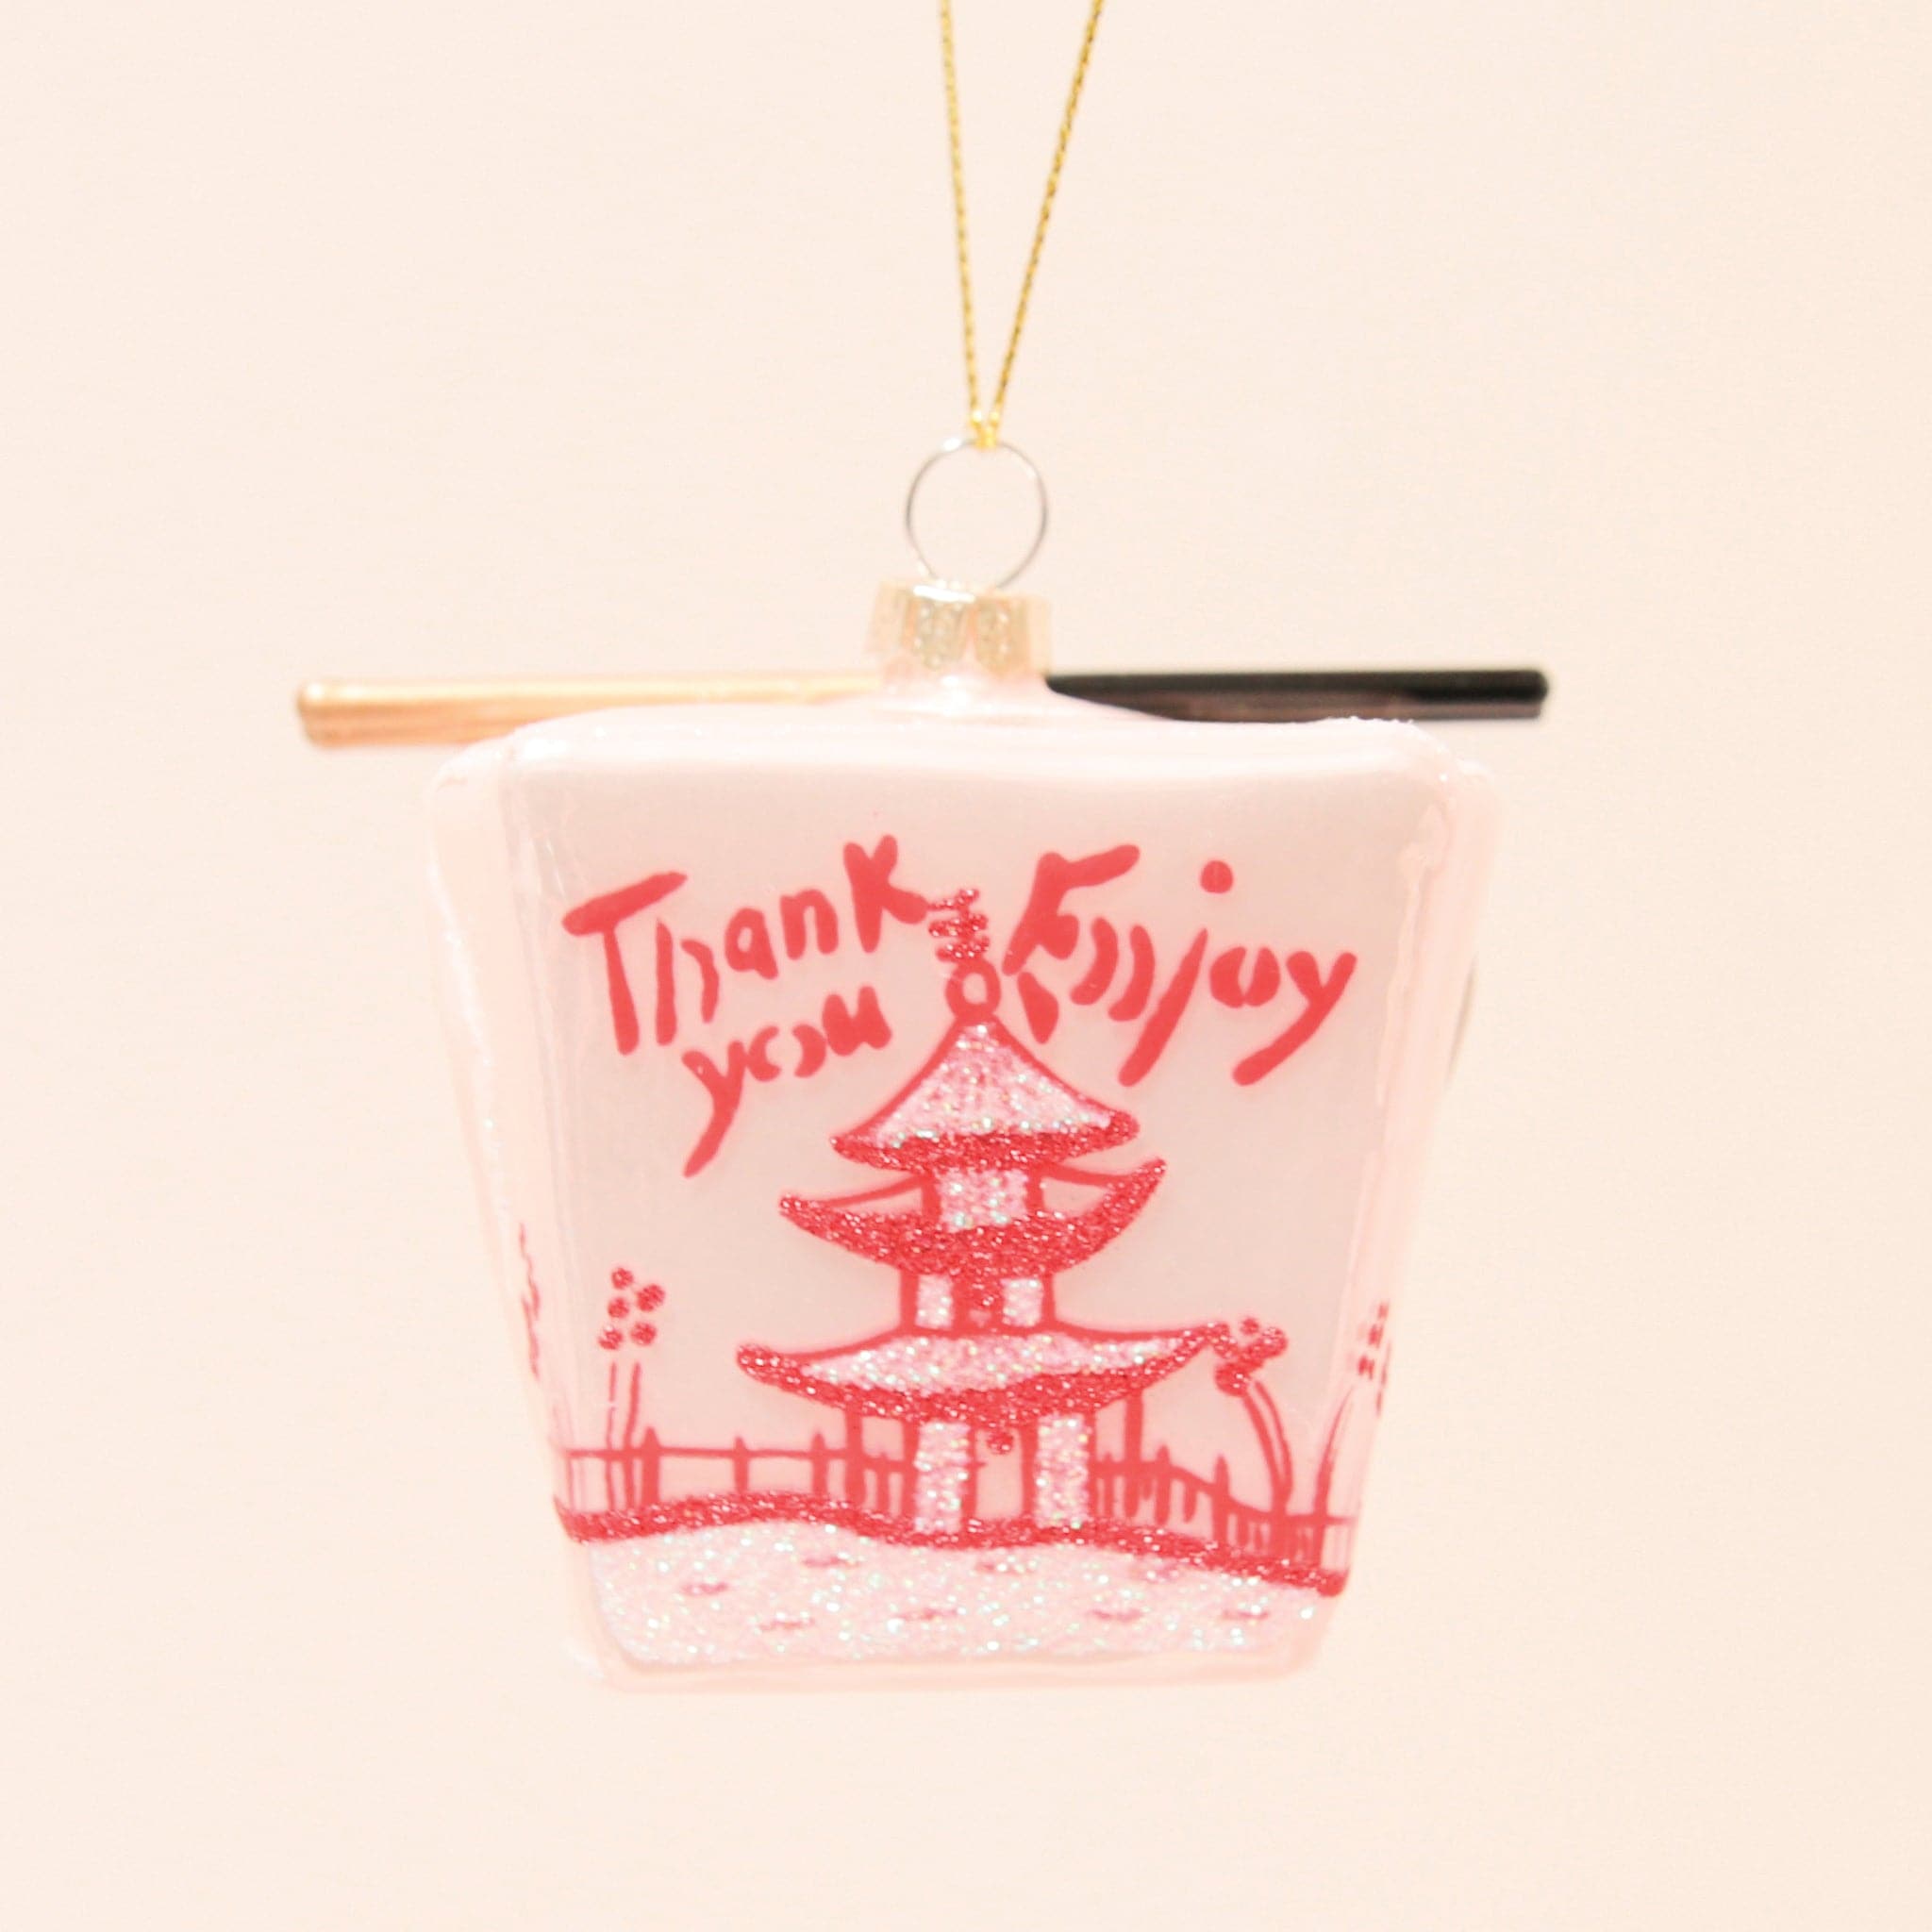 A glass ornament made to look like a pink Chinese takeout box with a pair of chopsticks across the top.